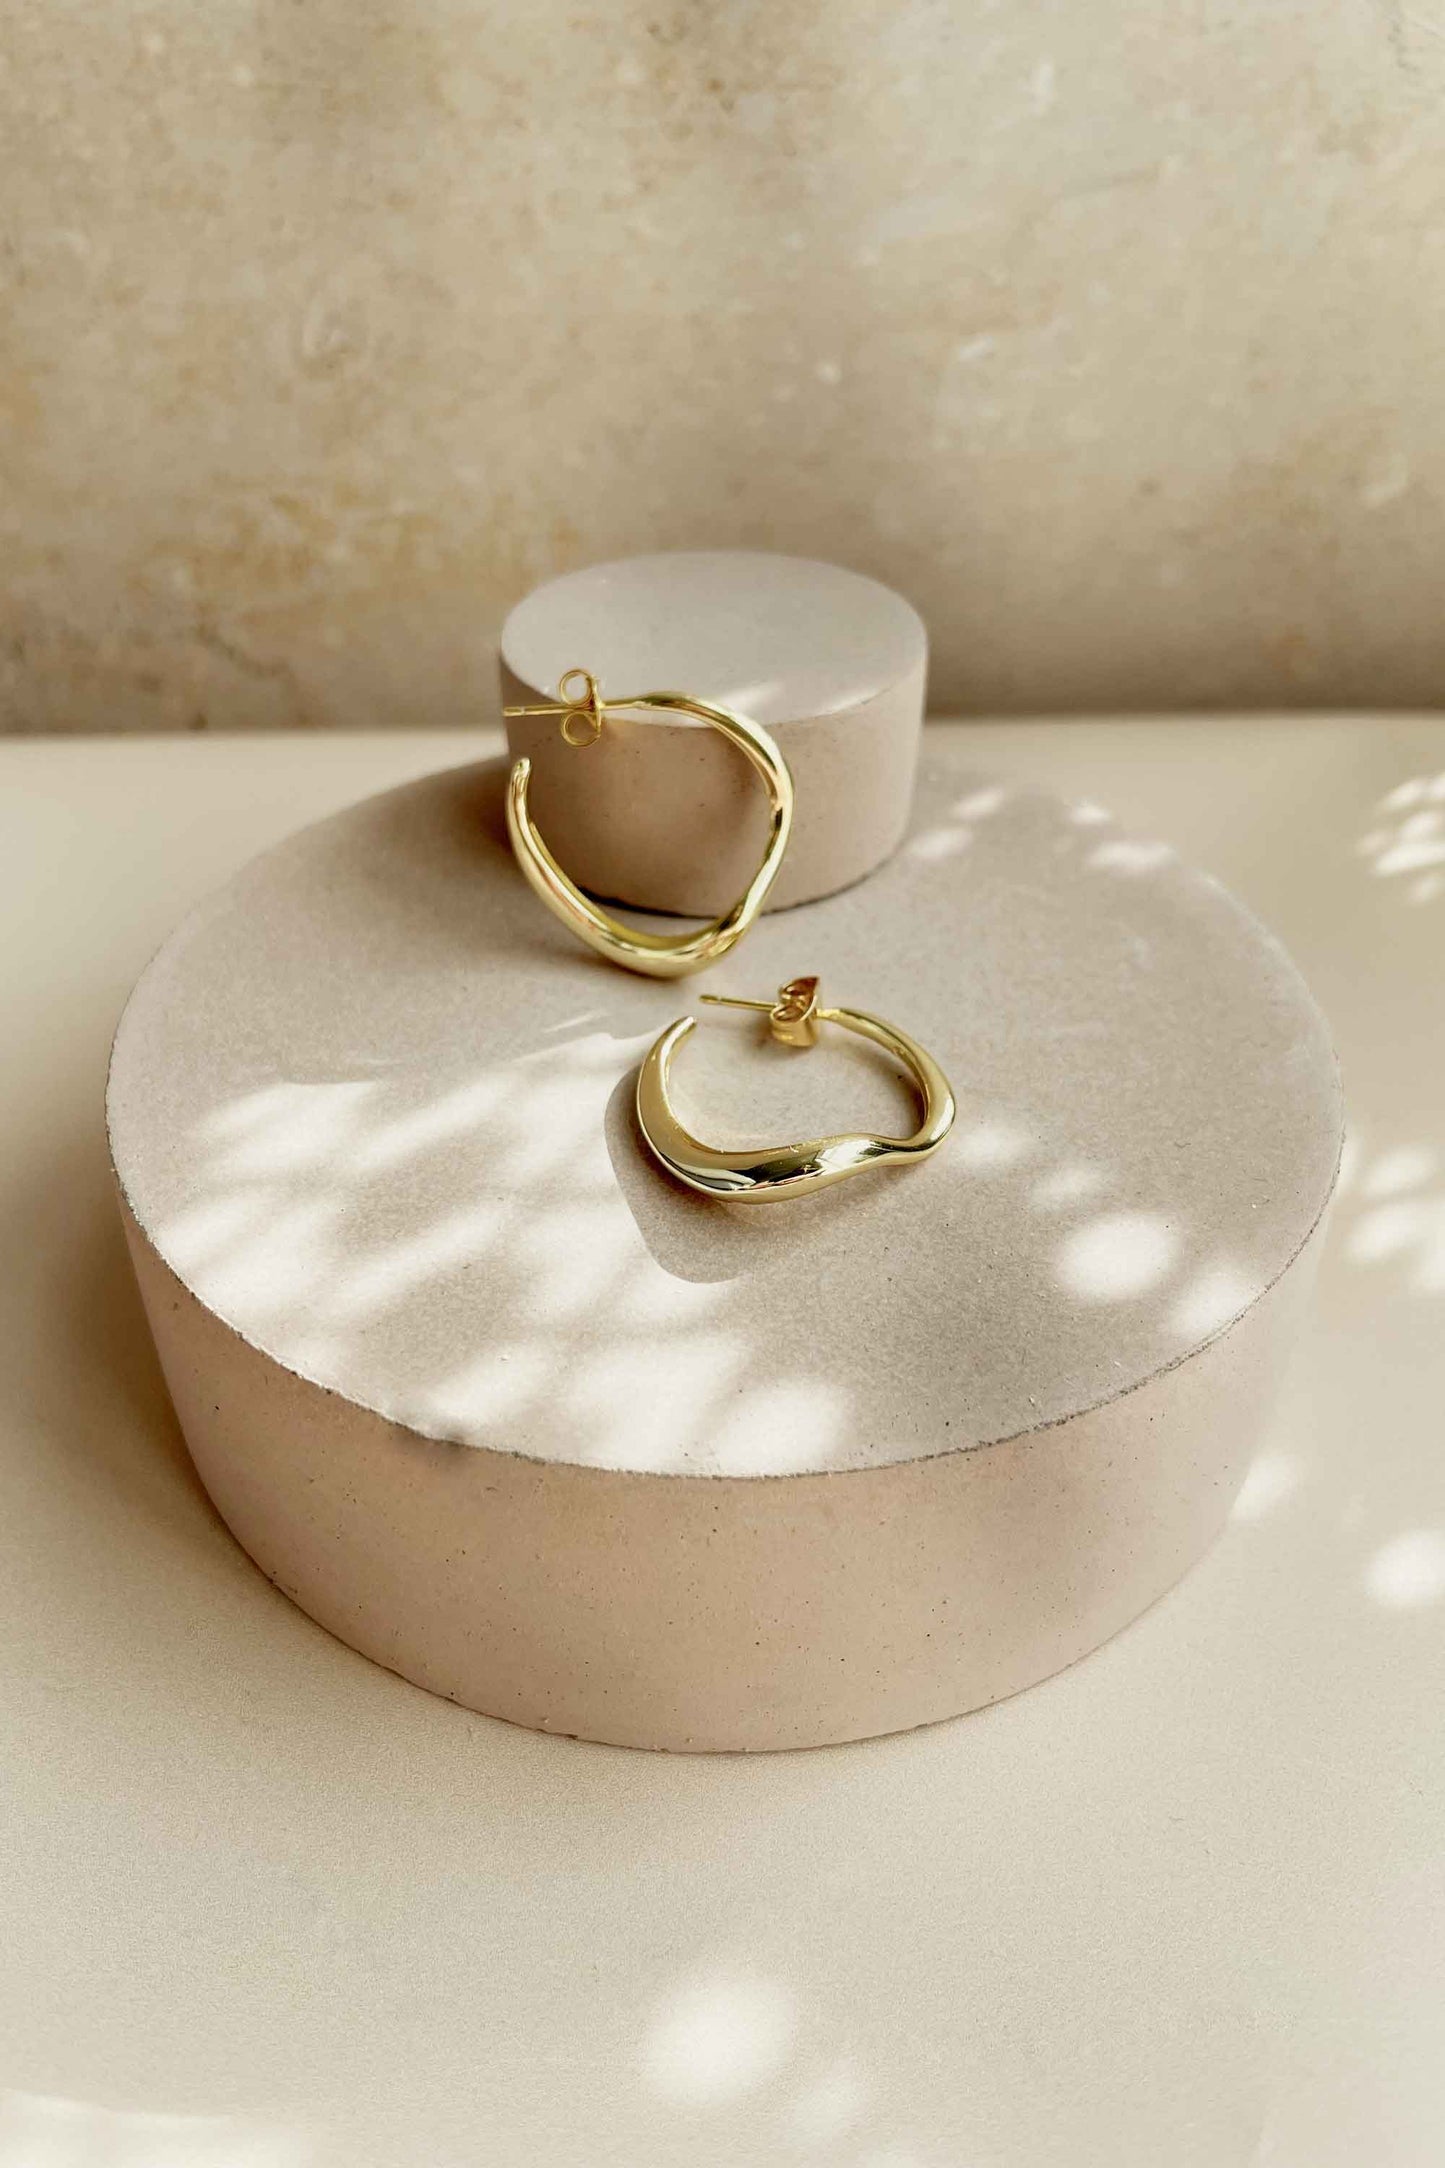 CURVED-MOLTEN-STATEMENT-MODERN-CLASSIC-GOLD-HOOPS-CLOSE-UP-FLAT